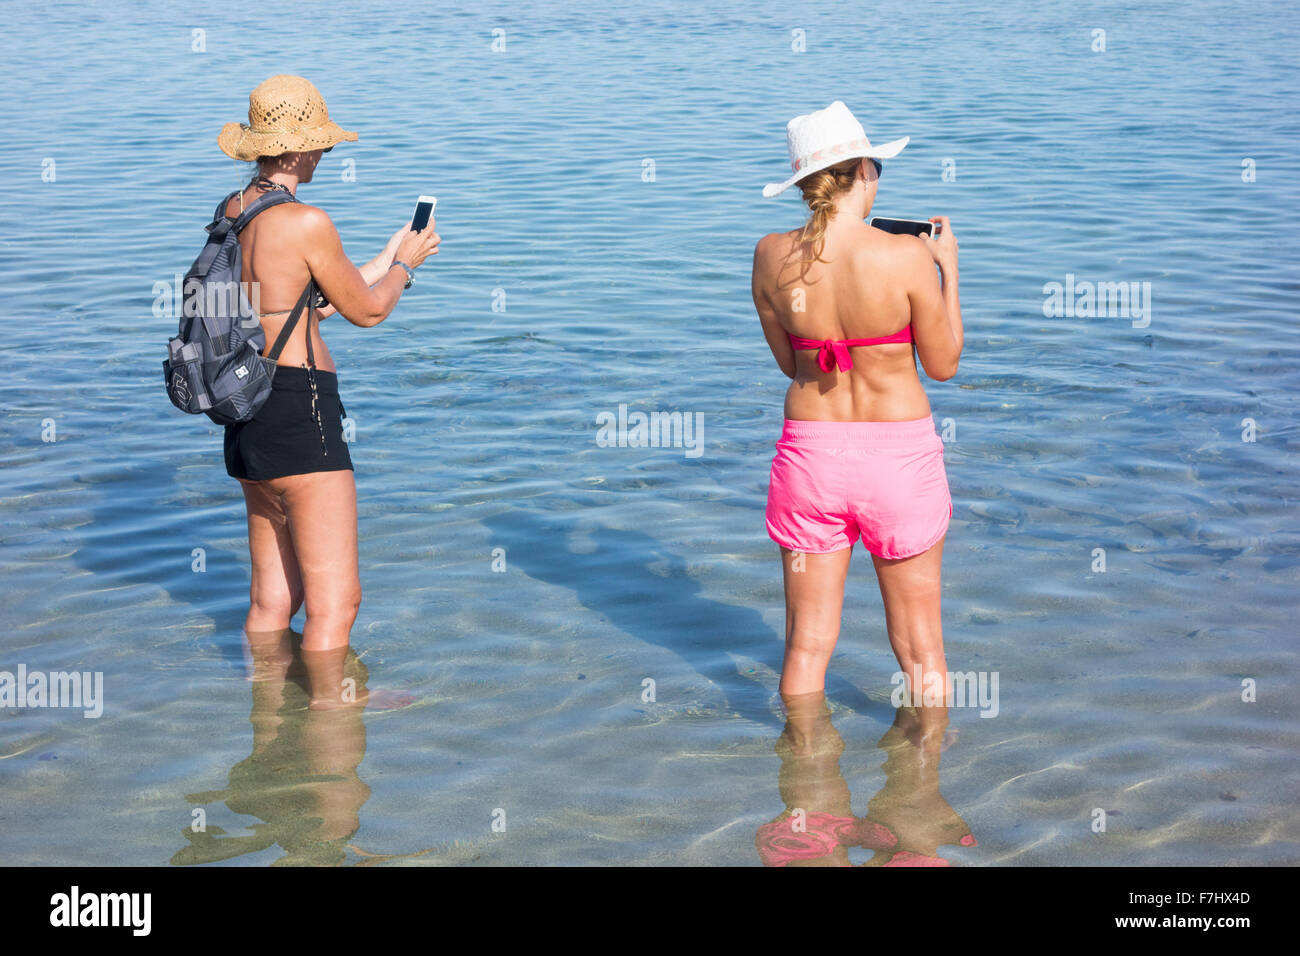 Two young female tourists taking selfies on beach Stock Photo